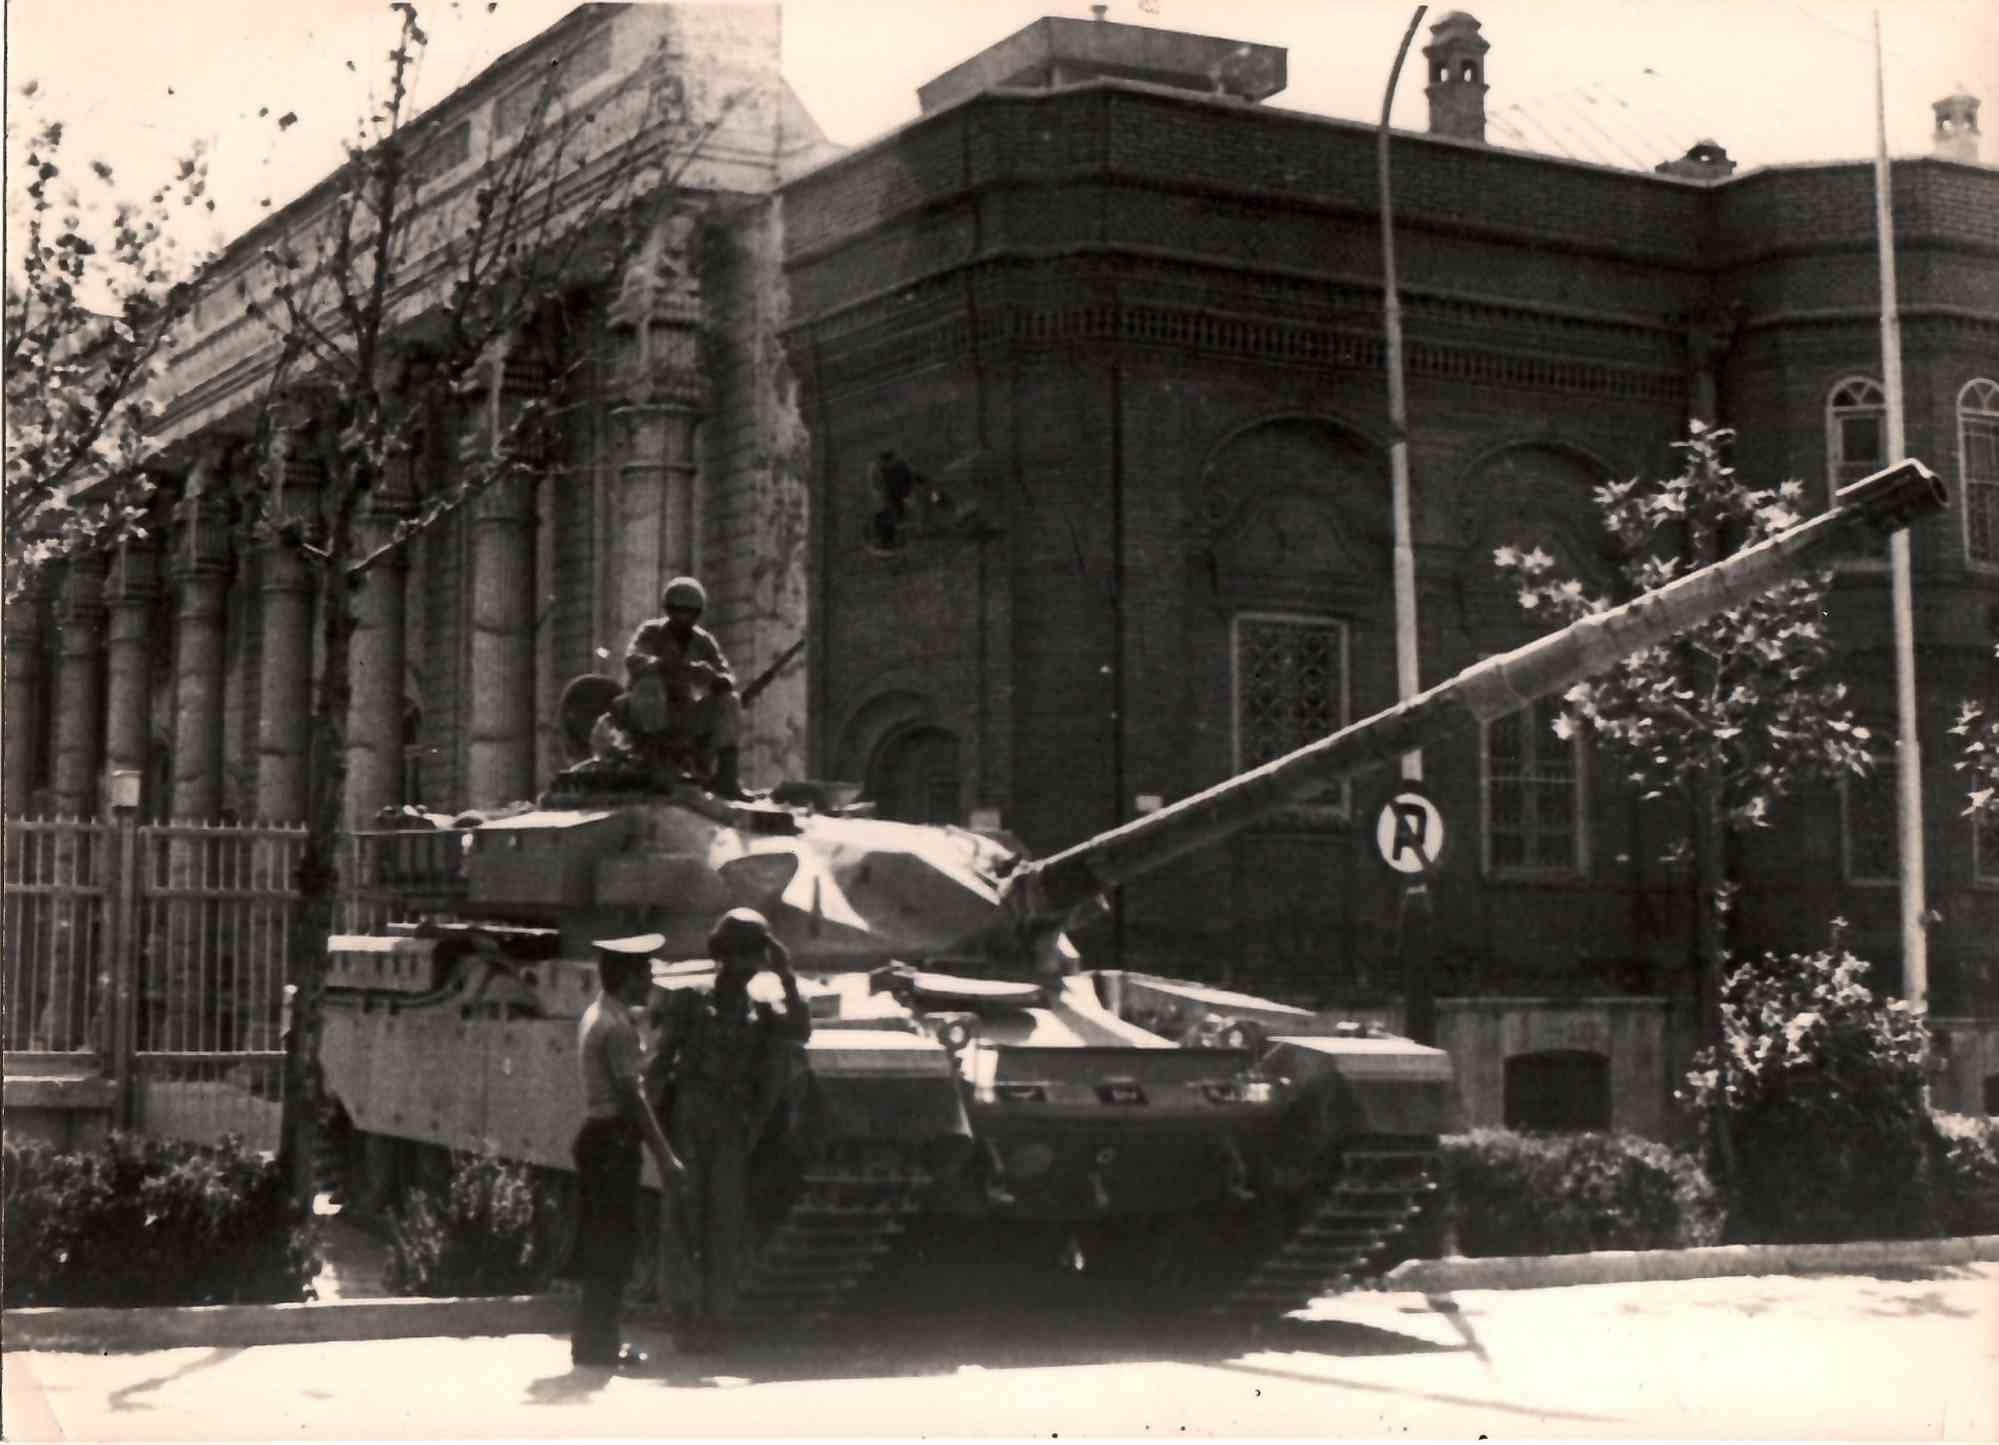 Unknown Black and White Photograph - Tank in Santiago - Chile - Vintage B/W photo - 1970s